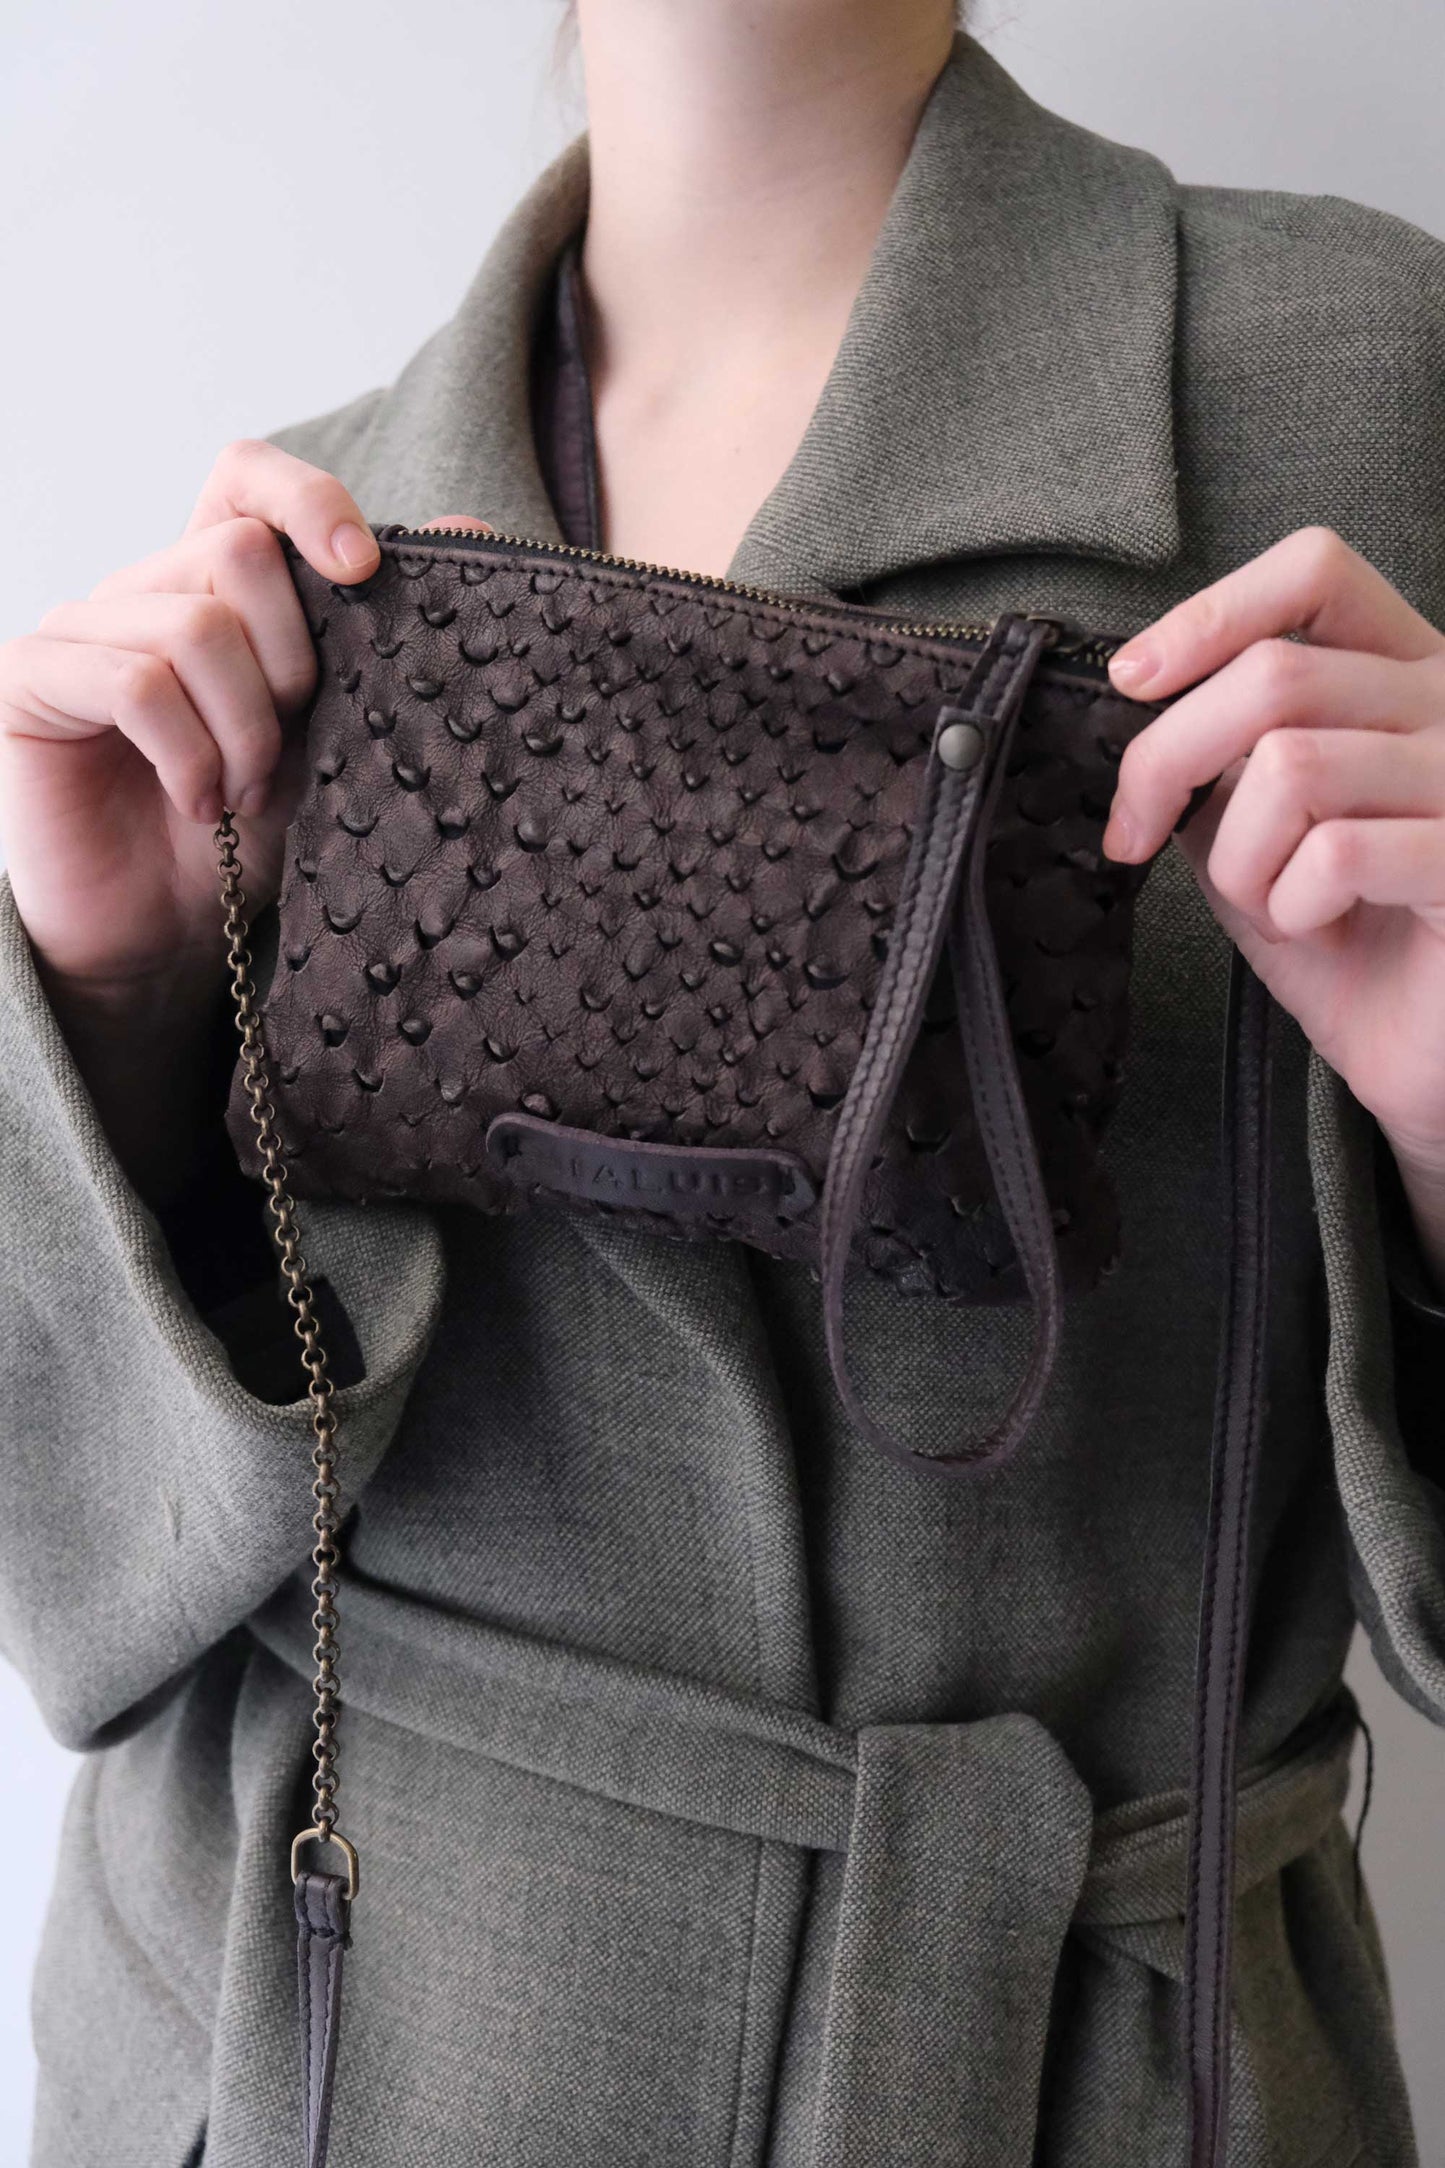 Tina pochette in brown perforated leather